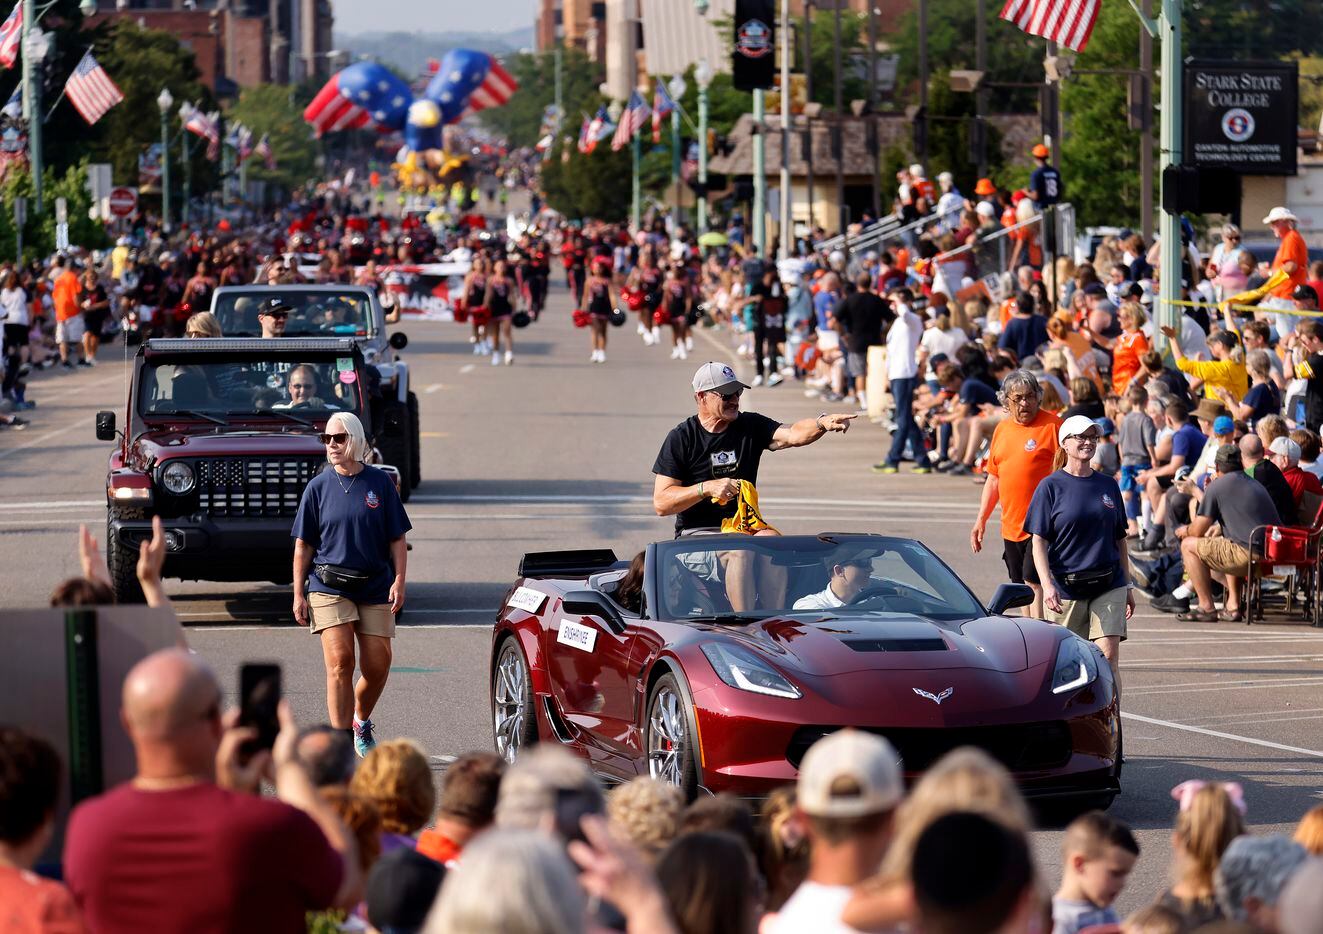 Pittsburgh Steelers Pro Football Hall of Fame inductee Bill Cowher points to his fans as he rides down Cleveland Ave during the Canton Repository Grand Parade in downtown Canton, Ohio, Saturday, August 7, 2021. The parade honored newly elected and former members of the Hall, including newcomers and former Dallas Cowboys players Cliff Harris, Drew Pearson and head coach Jimmy Johnson. (Tom Fox/The Dallas Morning News)